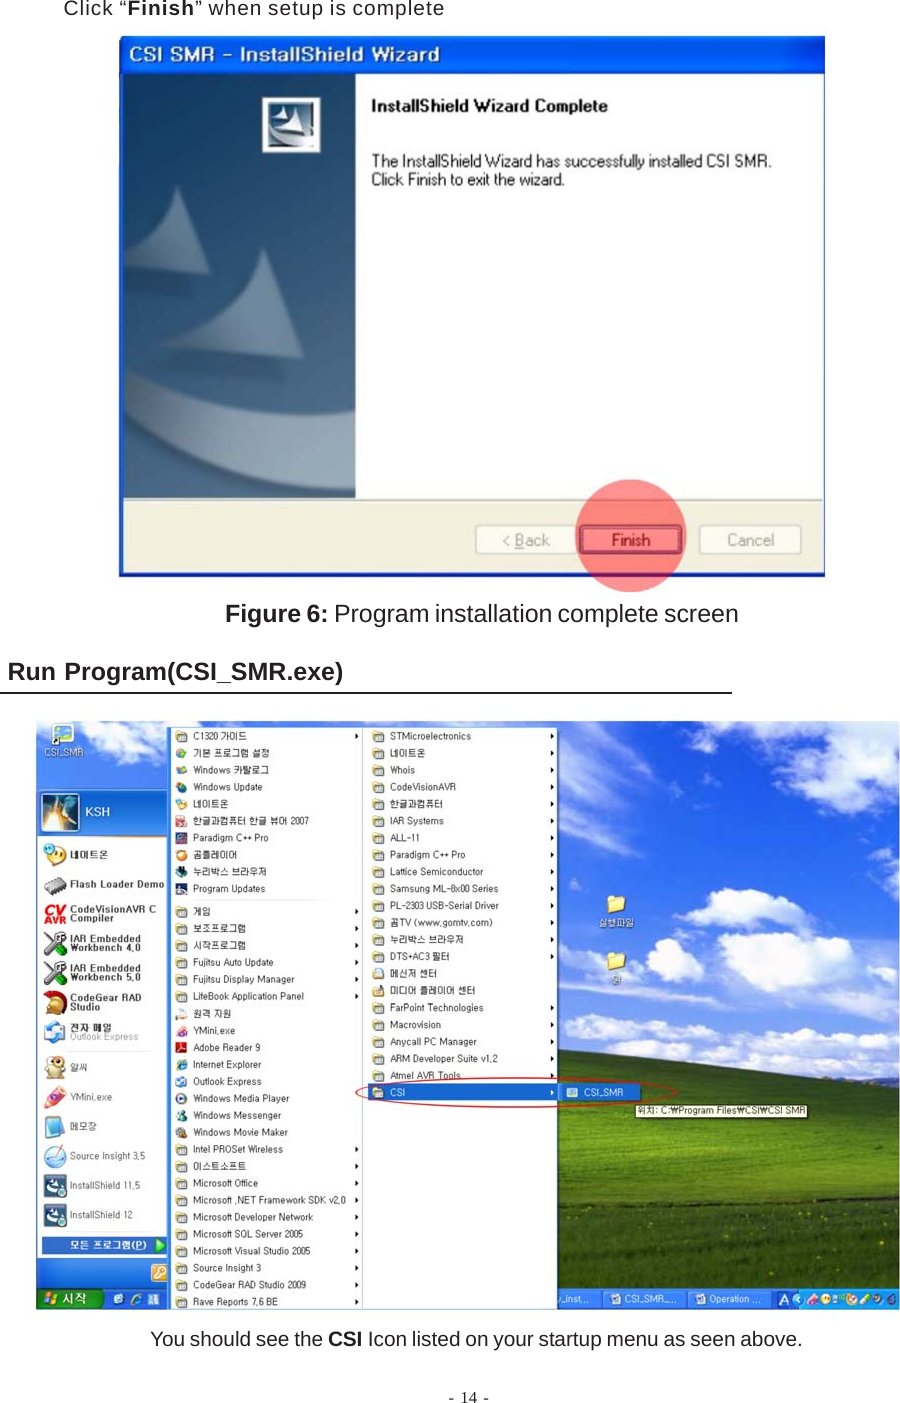 Figure 6: Program installation complete screenClick “Finish” when setup is completeRun Program(CSI_SMR.exe)You should see the CSI Icon listed on your startup menu as seen above.- 14 -